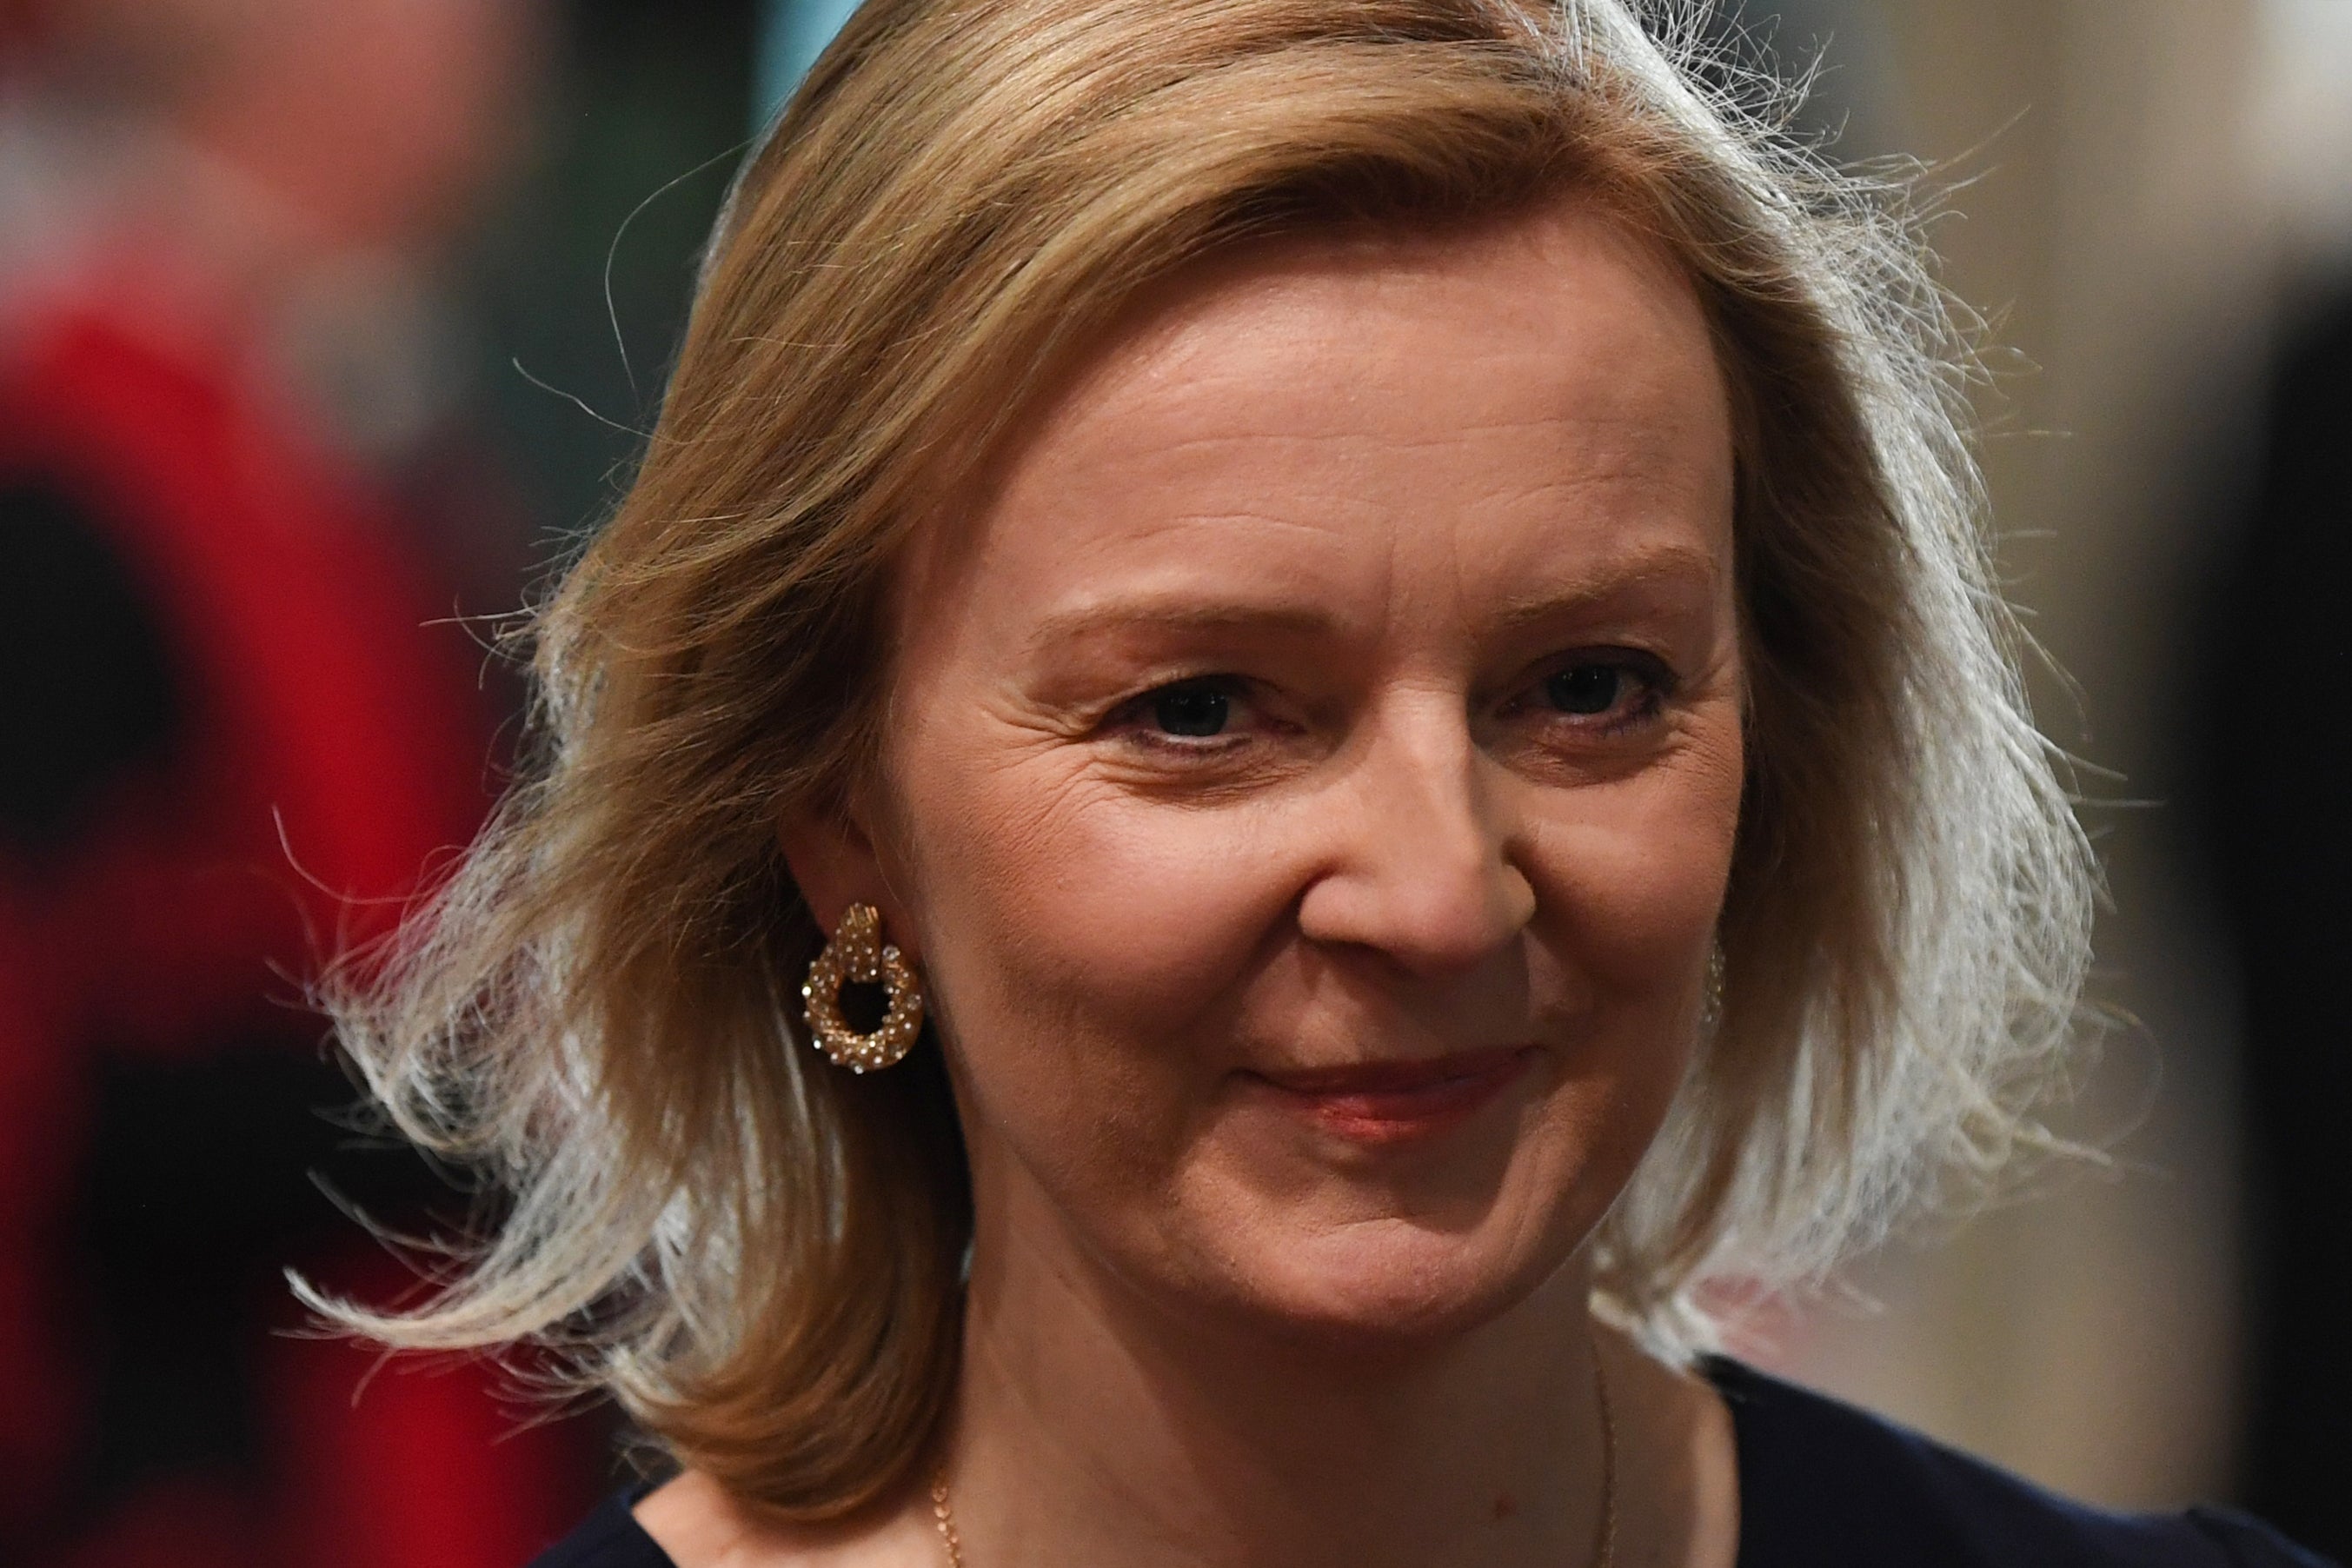 Liz Truss suggested how Russian sanctions could end